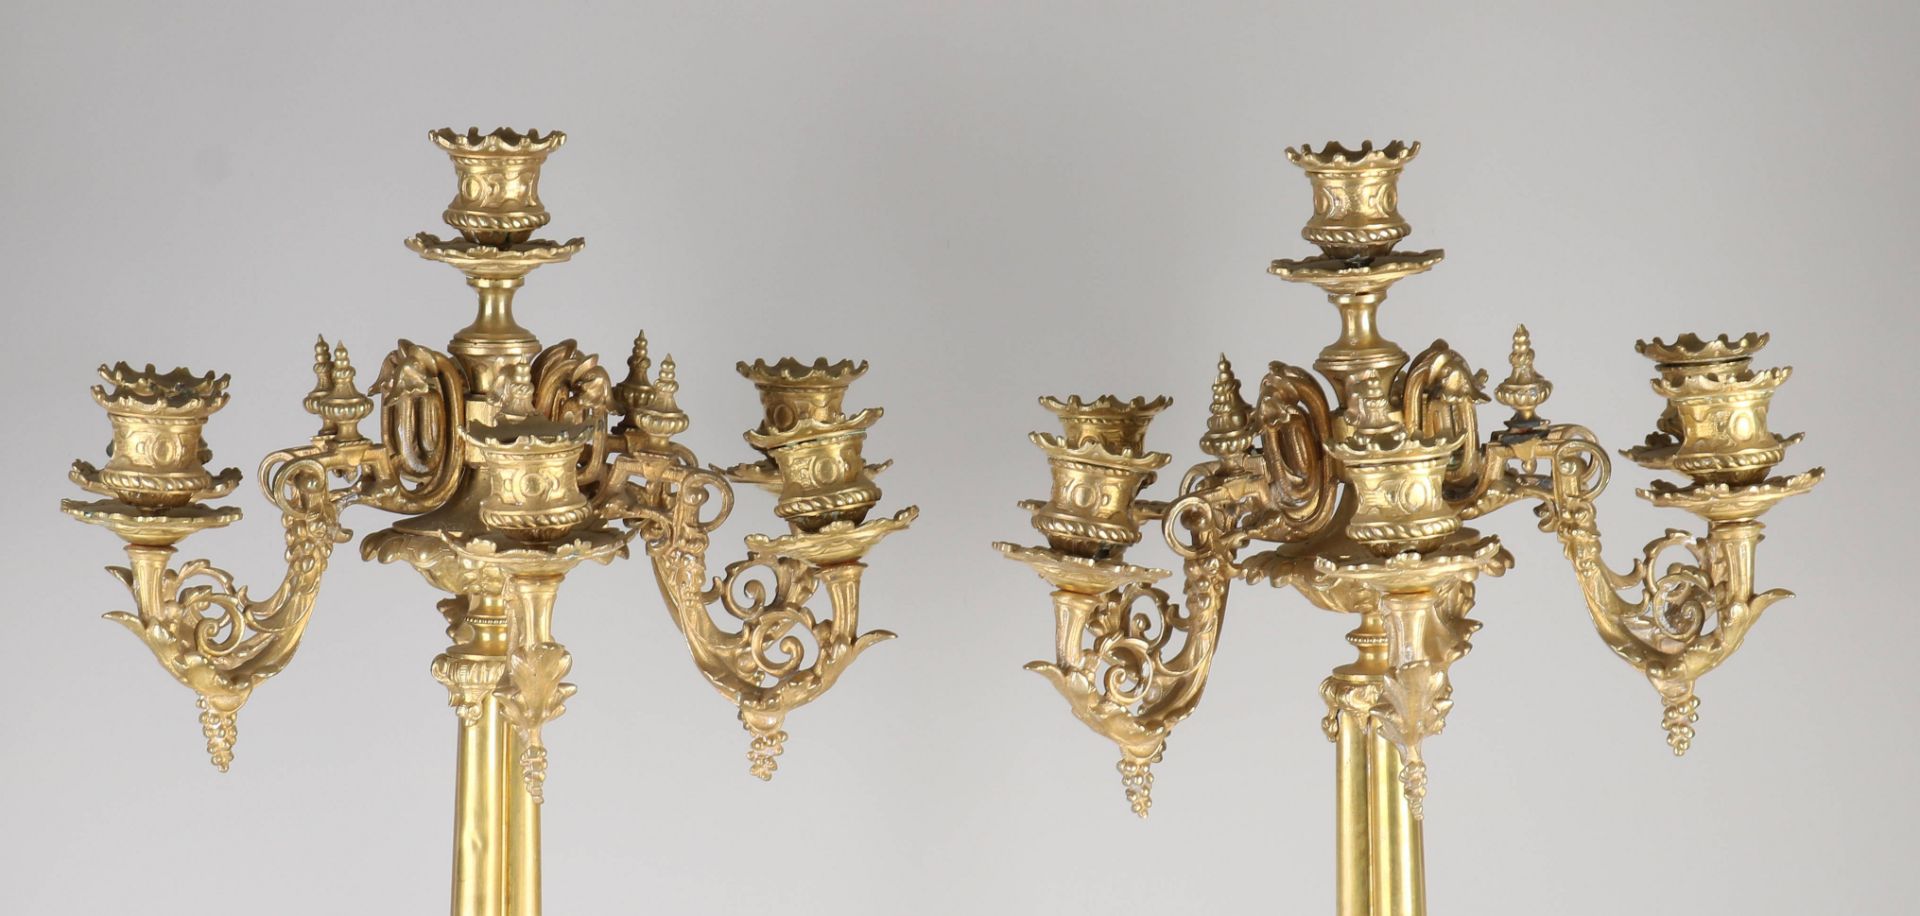 Two fire-gilded church candlesticks - Image 3 of 3